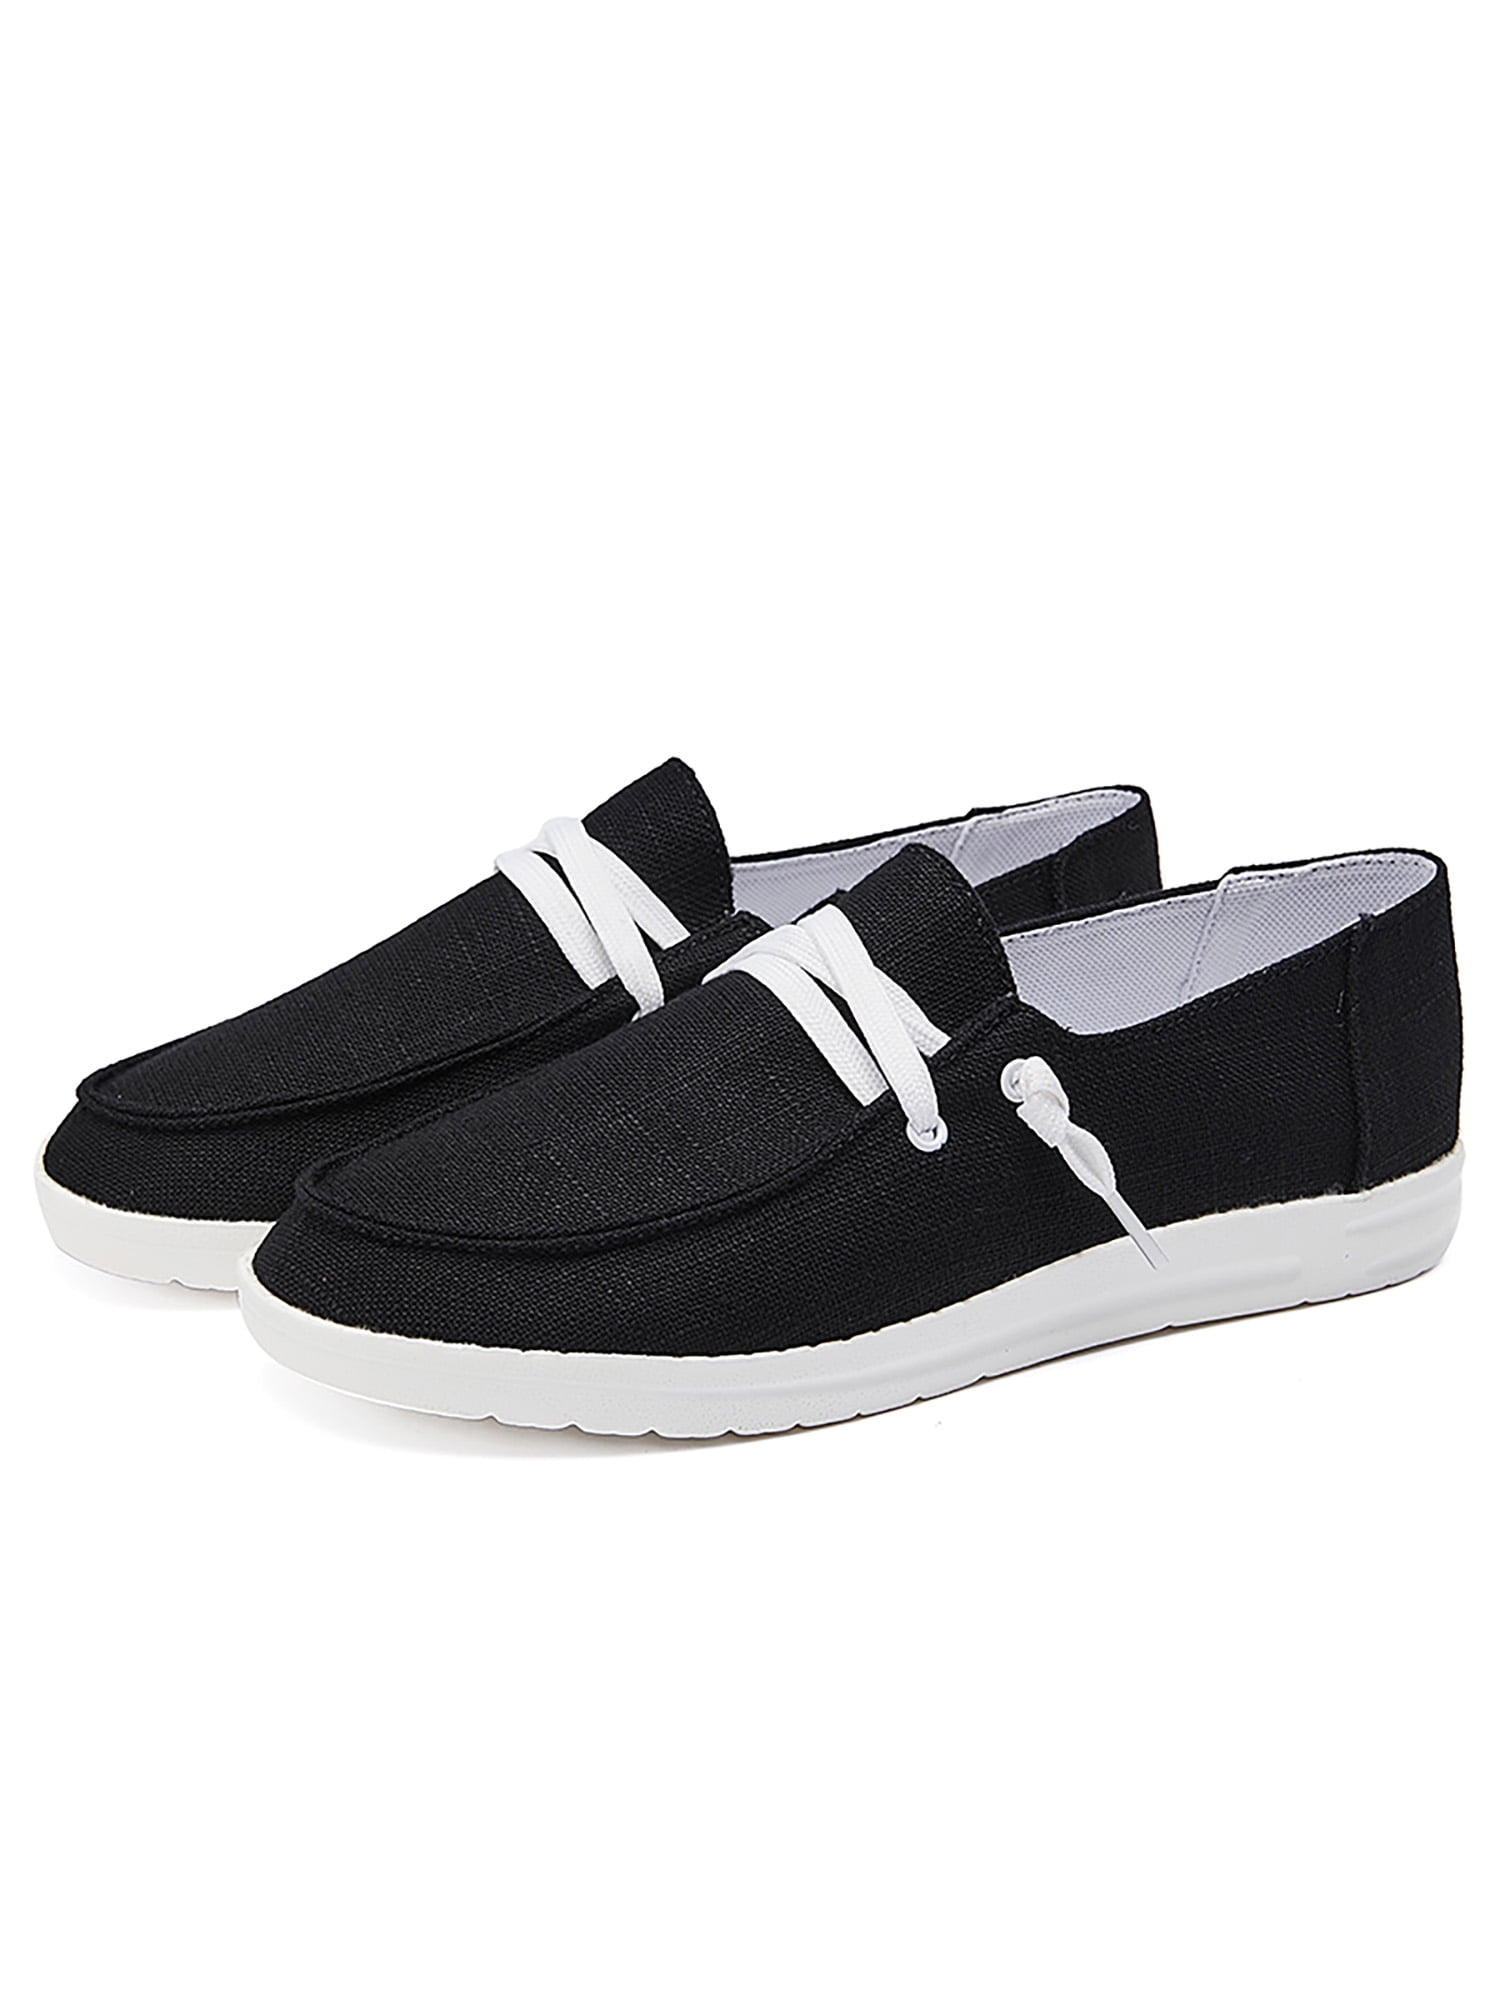 Women's Slip On Loafer Canvas Low Top Sneakers Casual Flat Comfortable ...